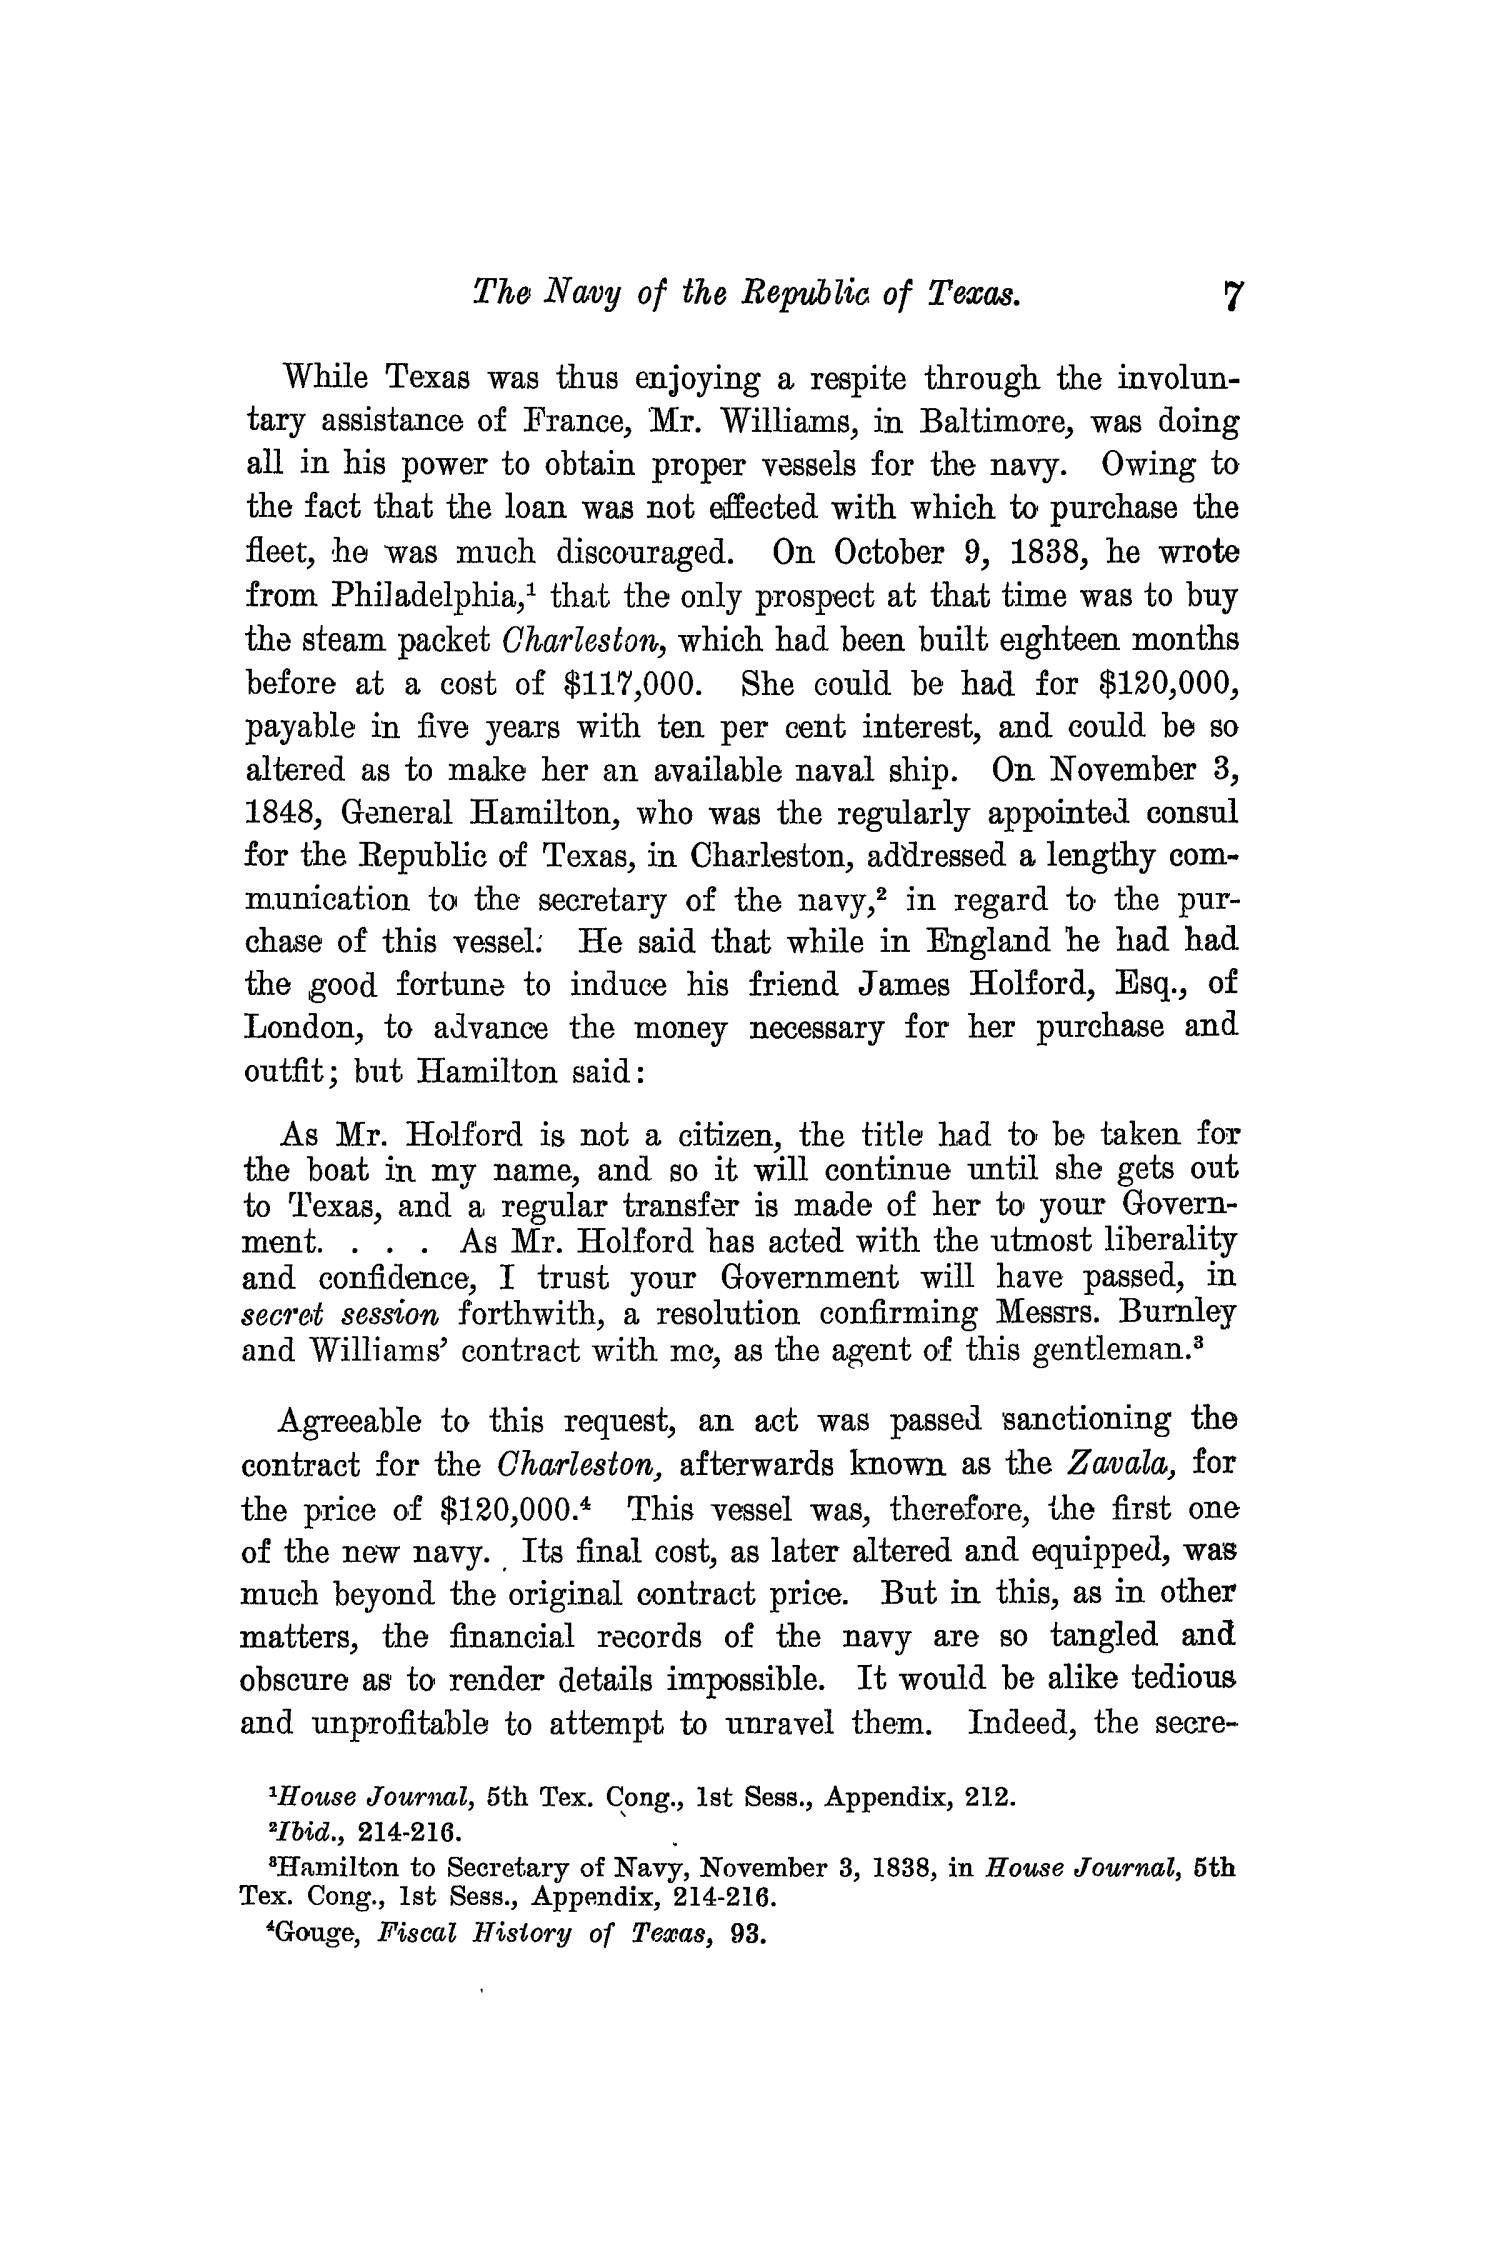 The Quarterly of the Texas State Historical Association, Volume 13, July 1909 - April, 1910
                                                
                                                    7
                                                